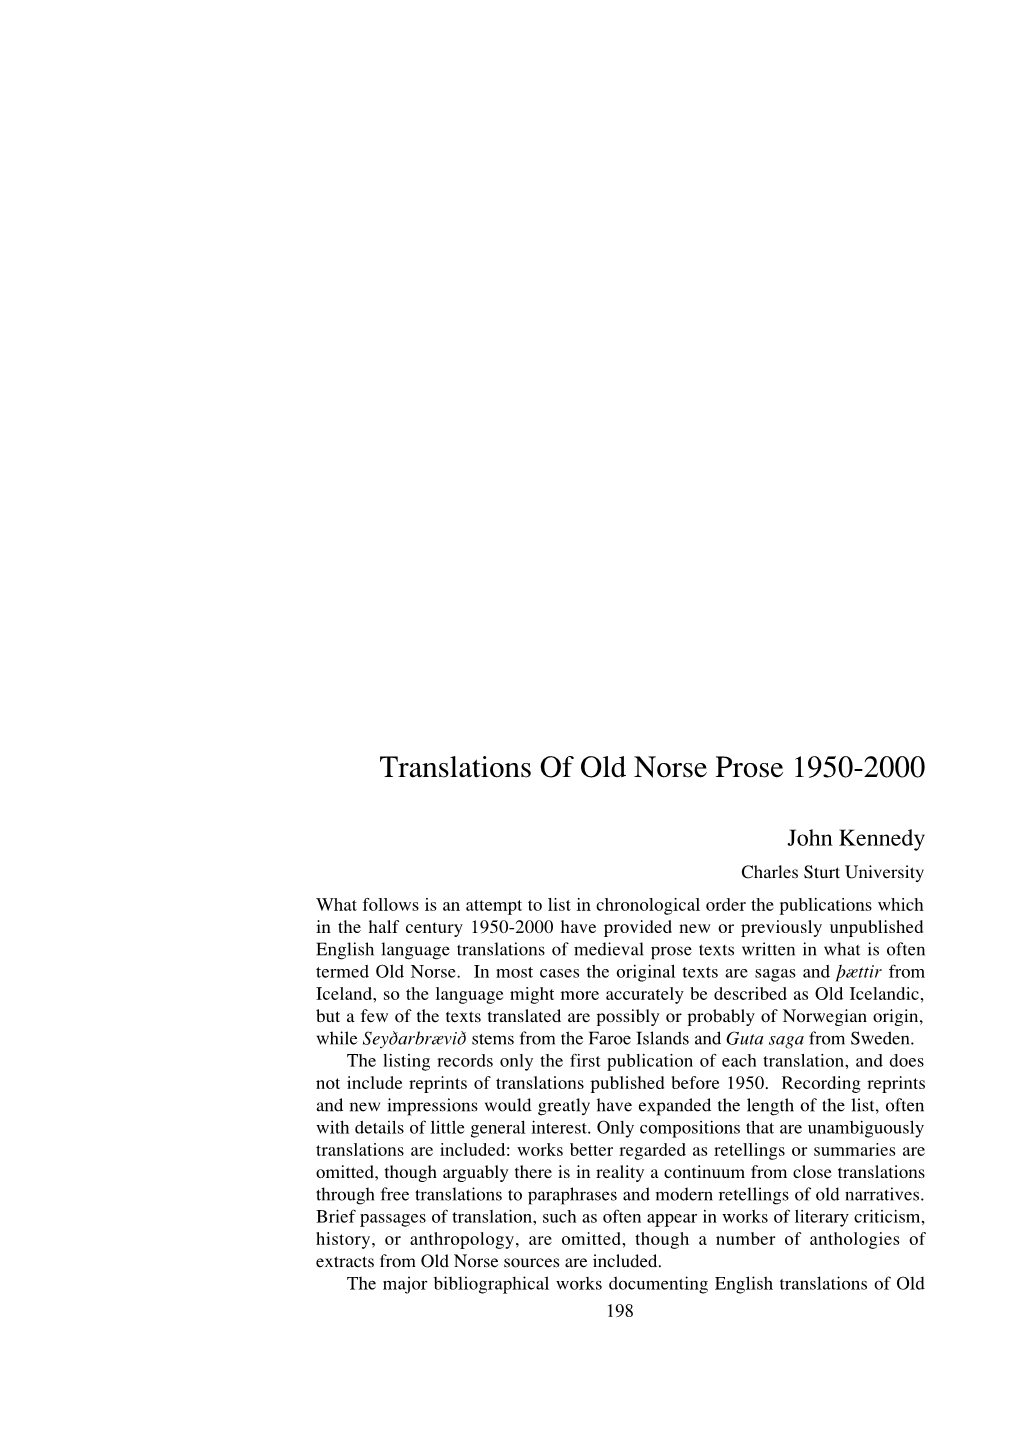 Translations of Old Norse Prose 1950-2000